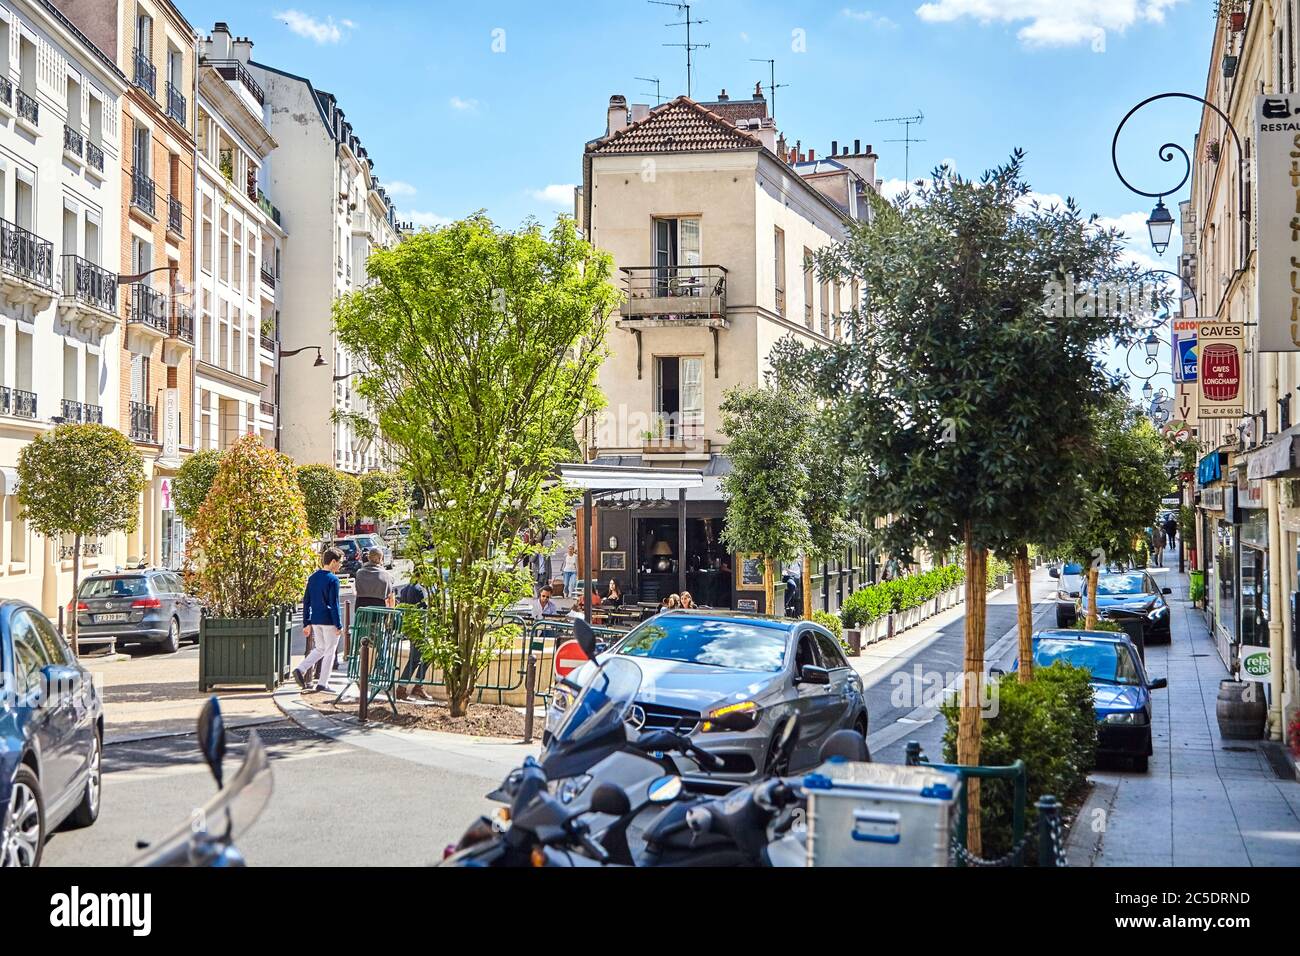 Paris, France - June 19, 2015: Parked cars in the narrow cozy streets of the city. Cafe on the corner of a house among green trees Stock Photo